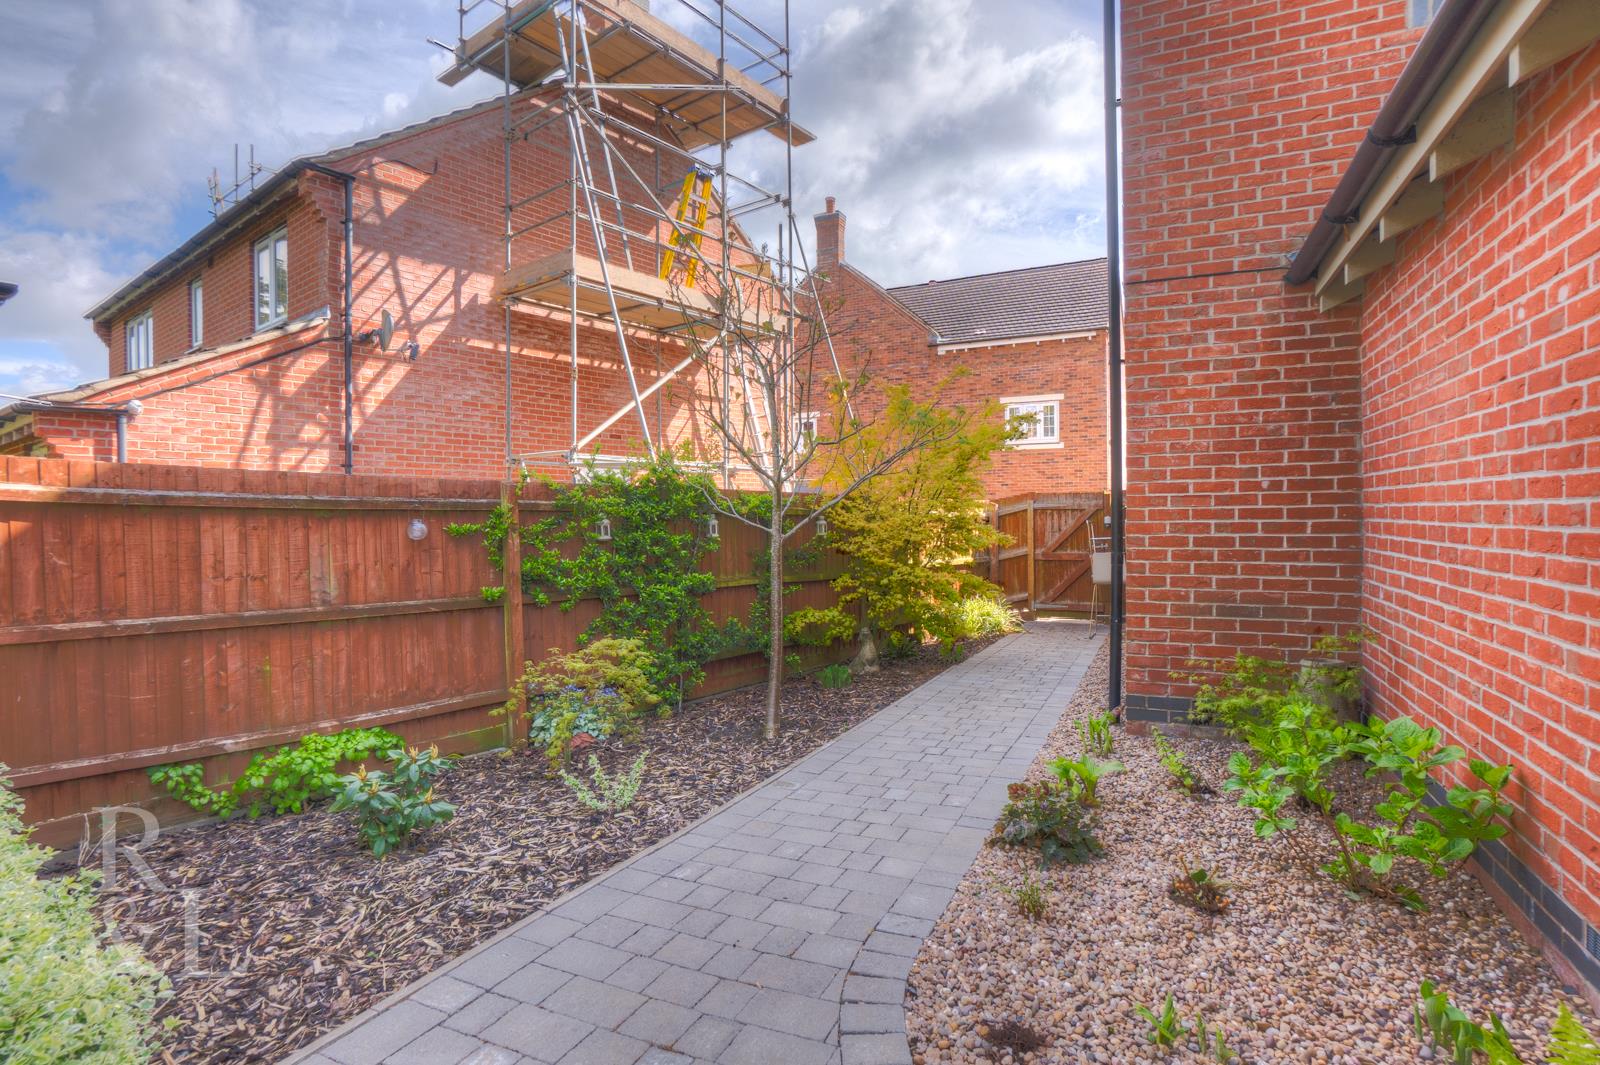 Property image for Pottery Lane, Lount